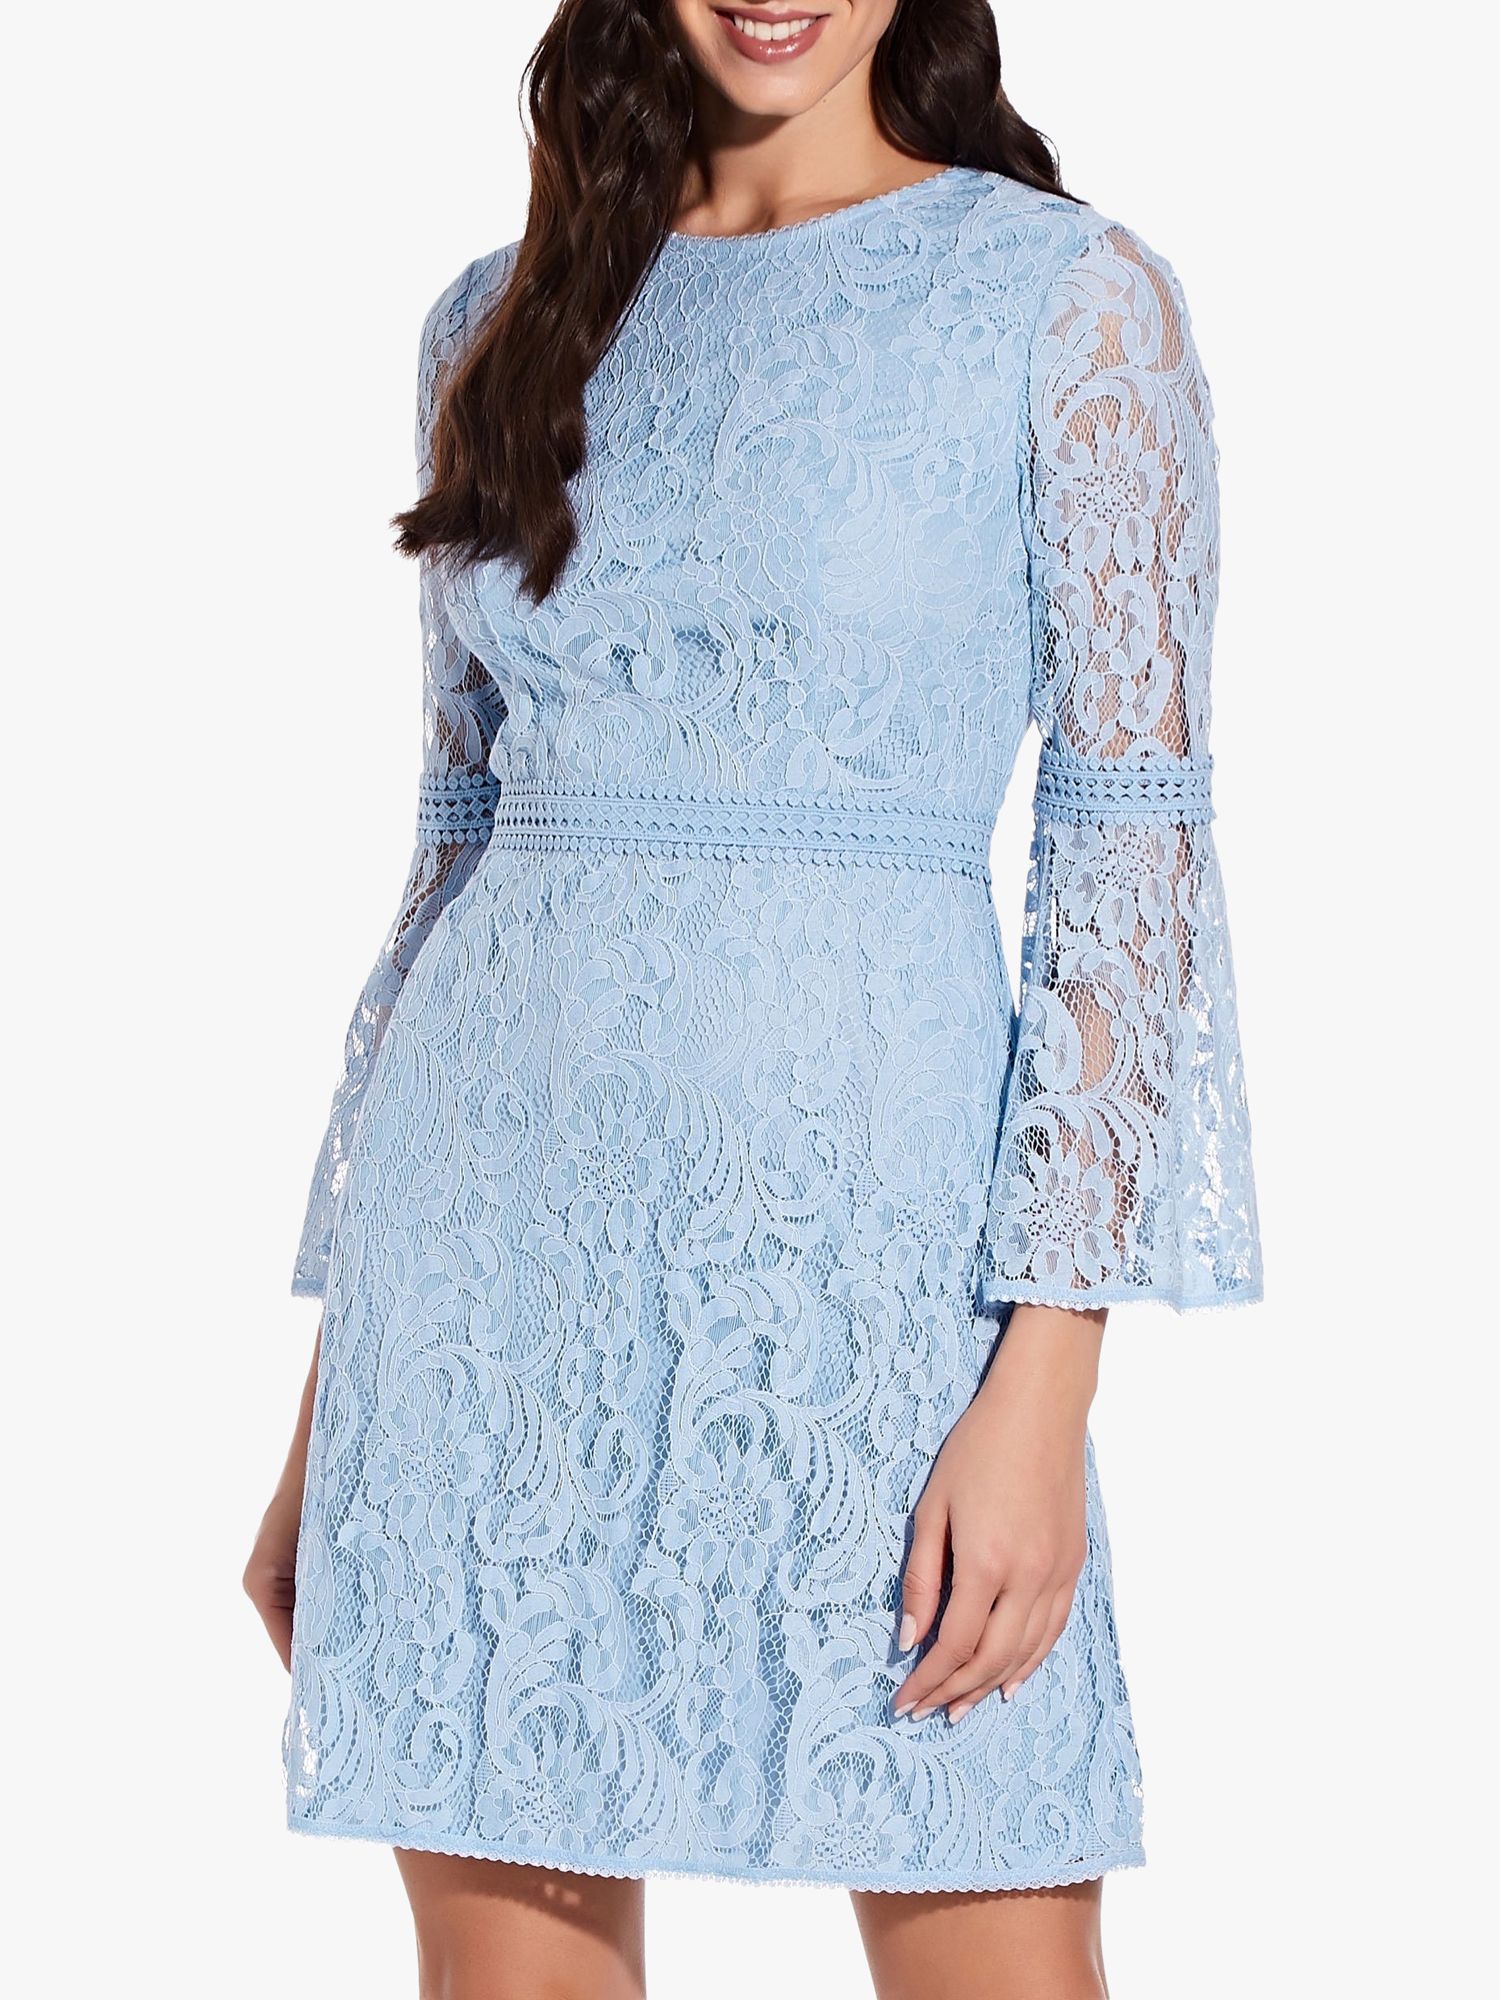 adrianna papell powder bell sleeve lace line dress johnlewis